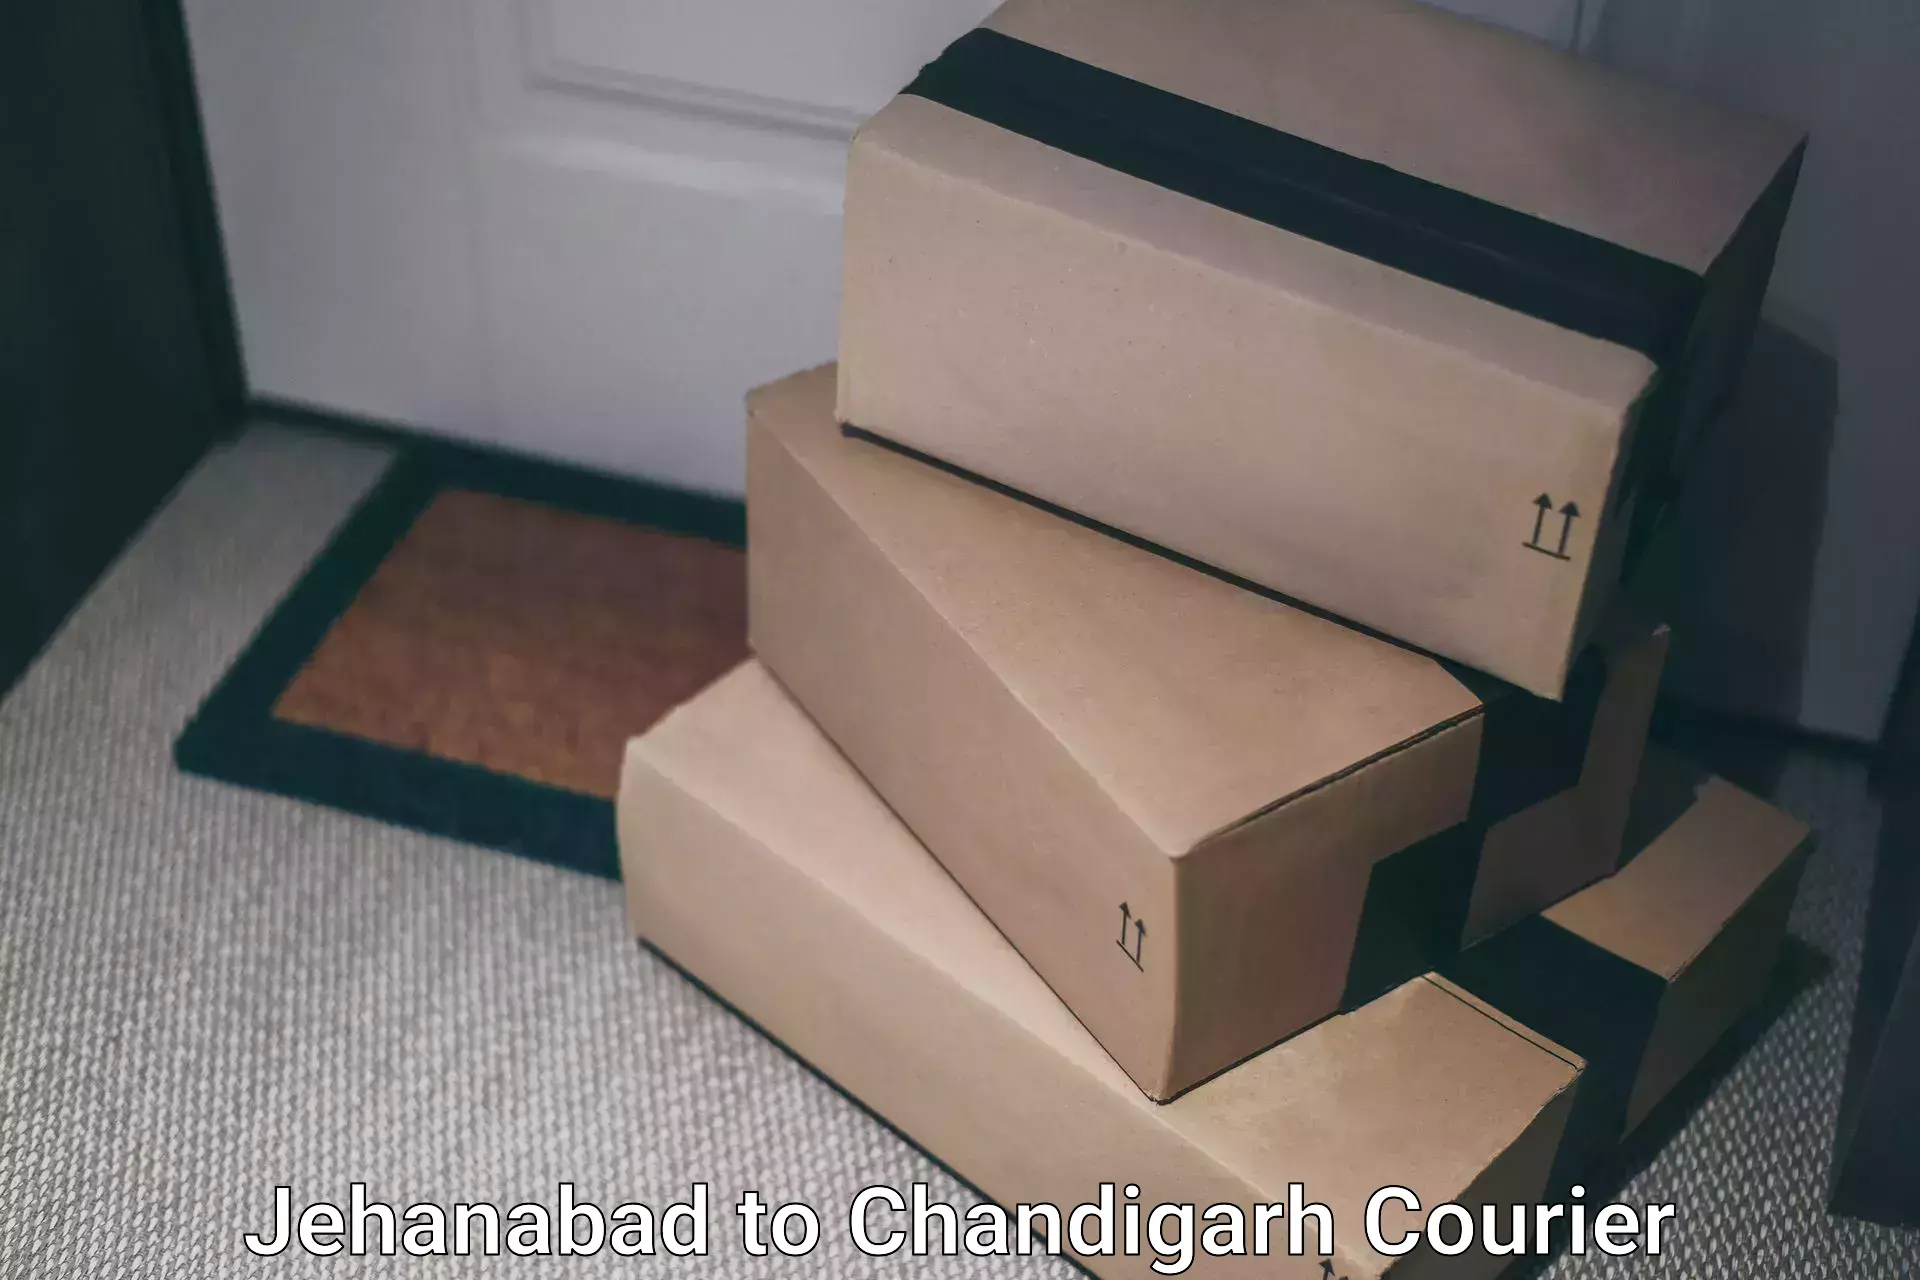 International courier networks Jehanabad to Chandigarh